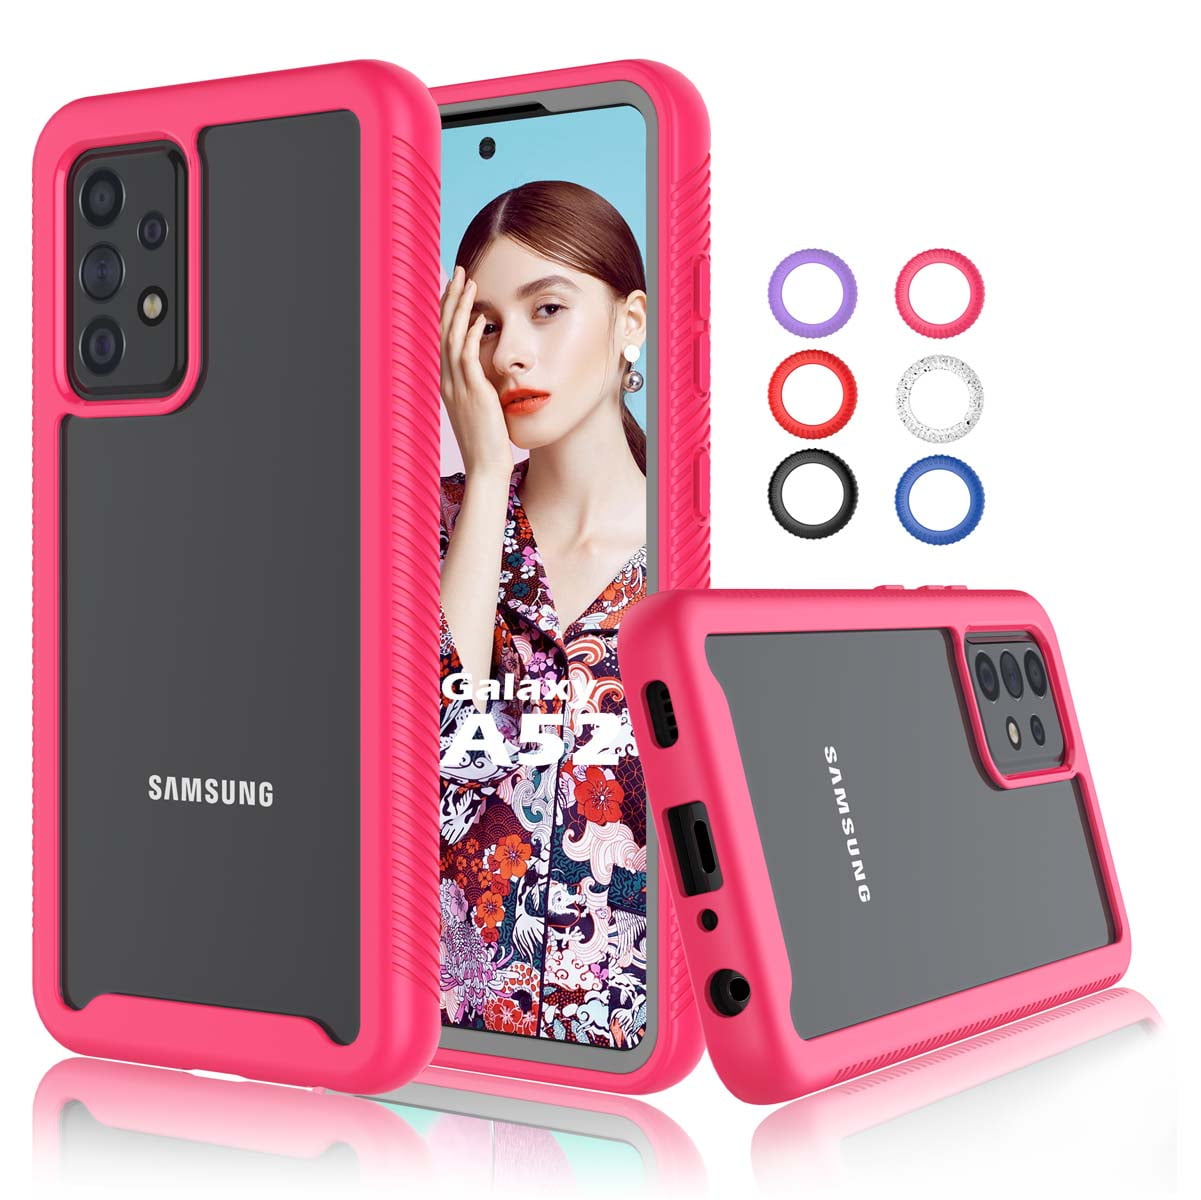  HNHYGETE Samsung A52 Case, Galaxy A52 5G Case, with HD Screen  Protector, Shockproof Tough Rugged Hard Rubber Bumper with 360 Rotation  Ring Kickstand Cases for Samsung Galaxy A52 5g (Red) 